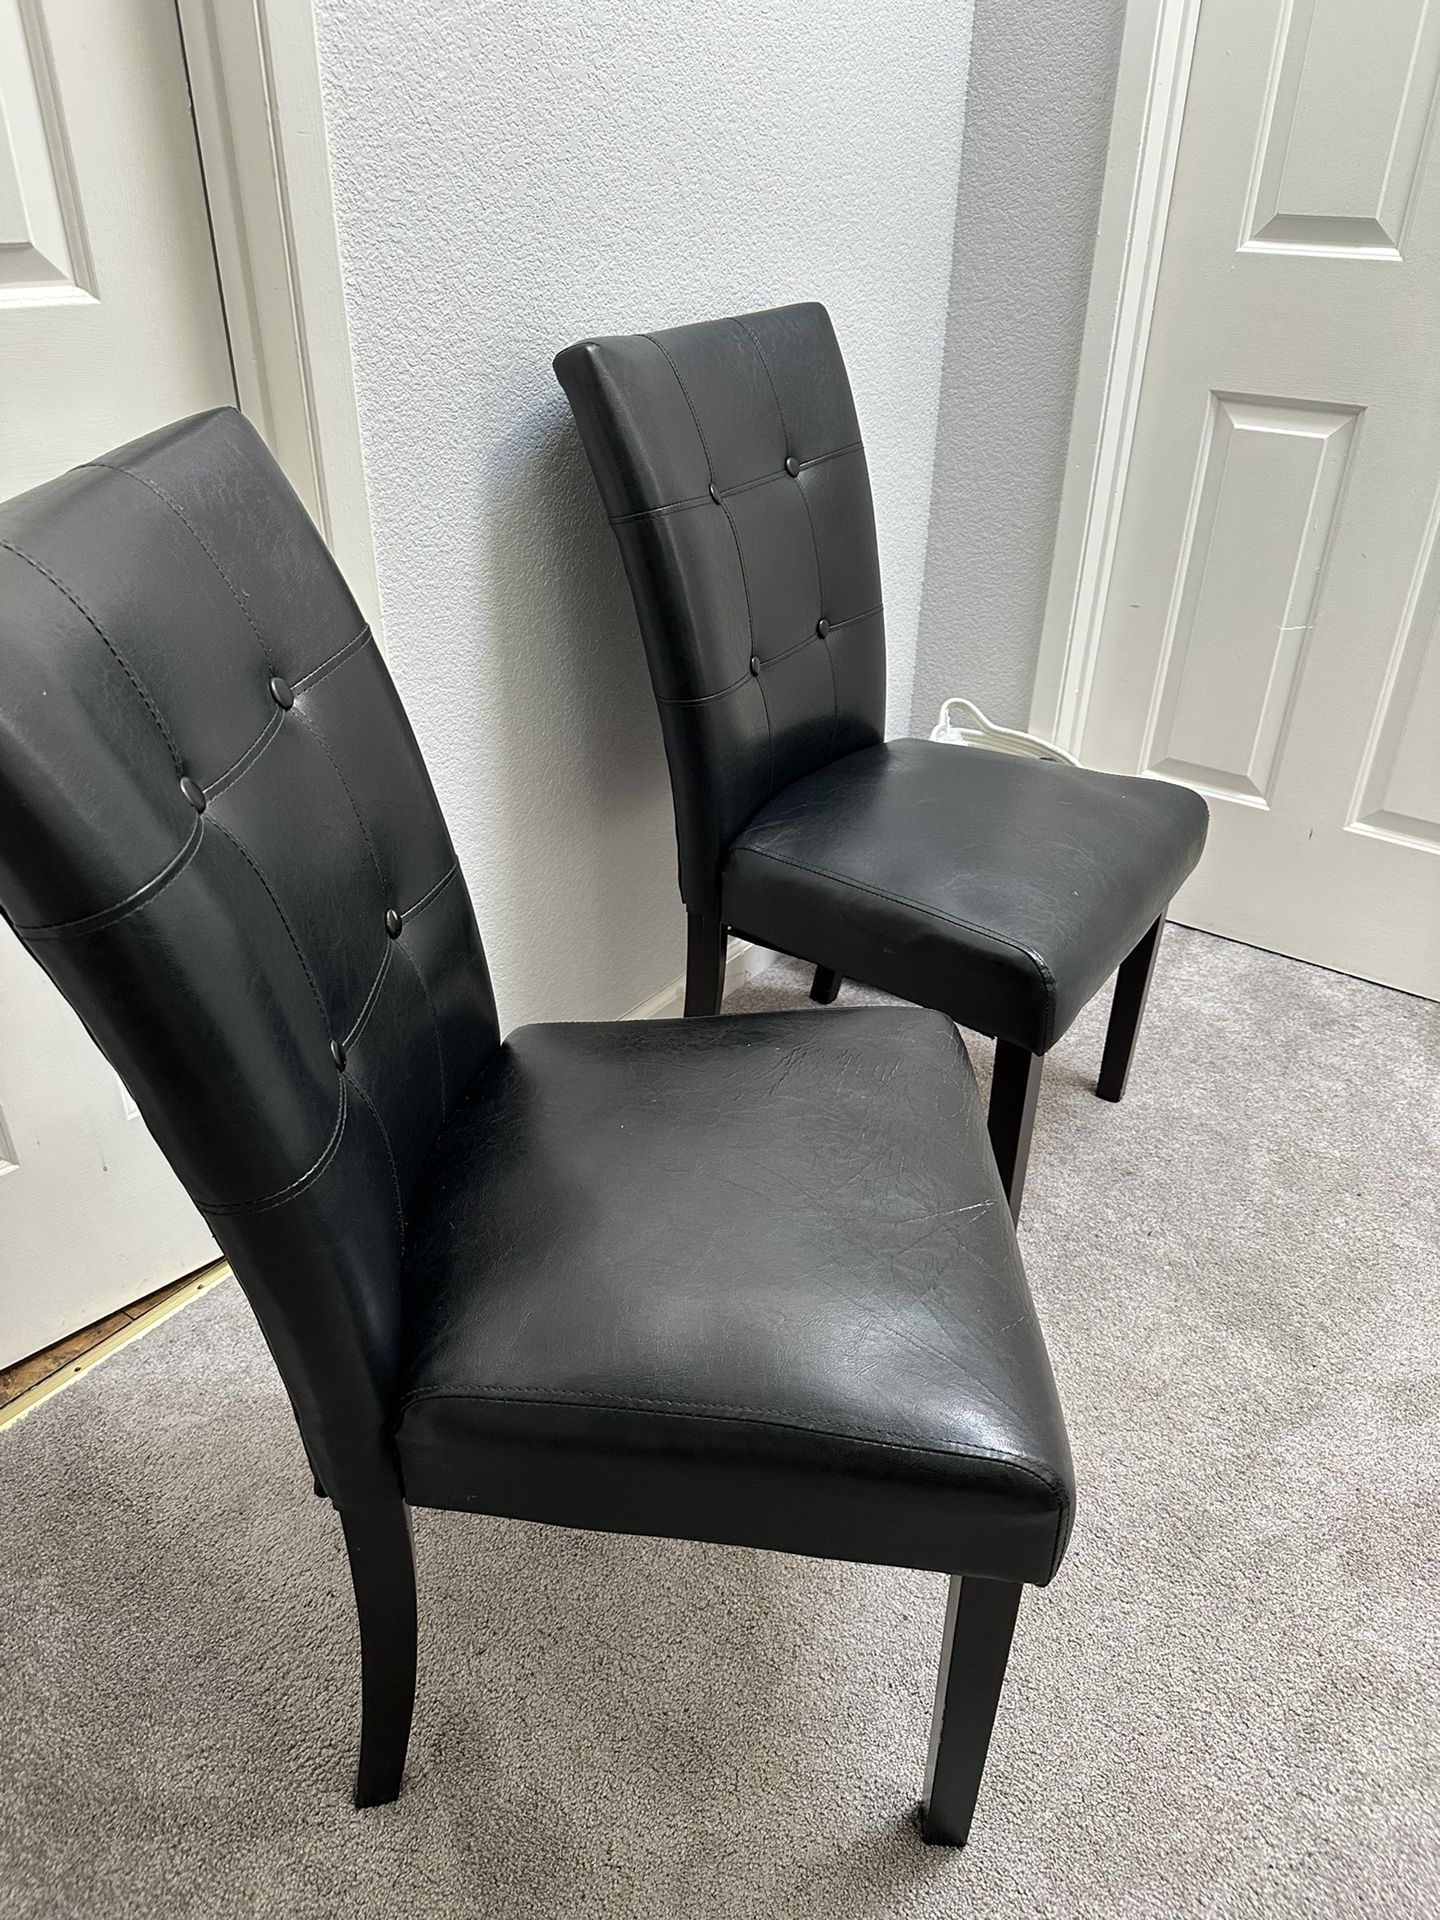 Two Black Kitchen Table Chairs